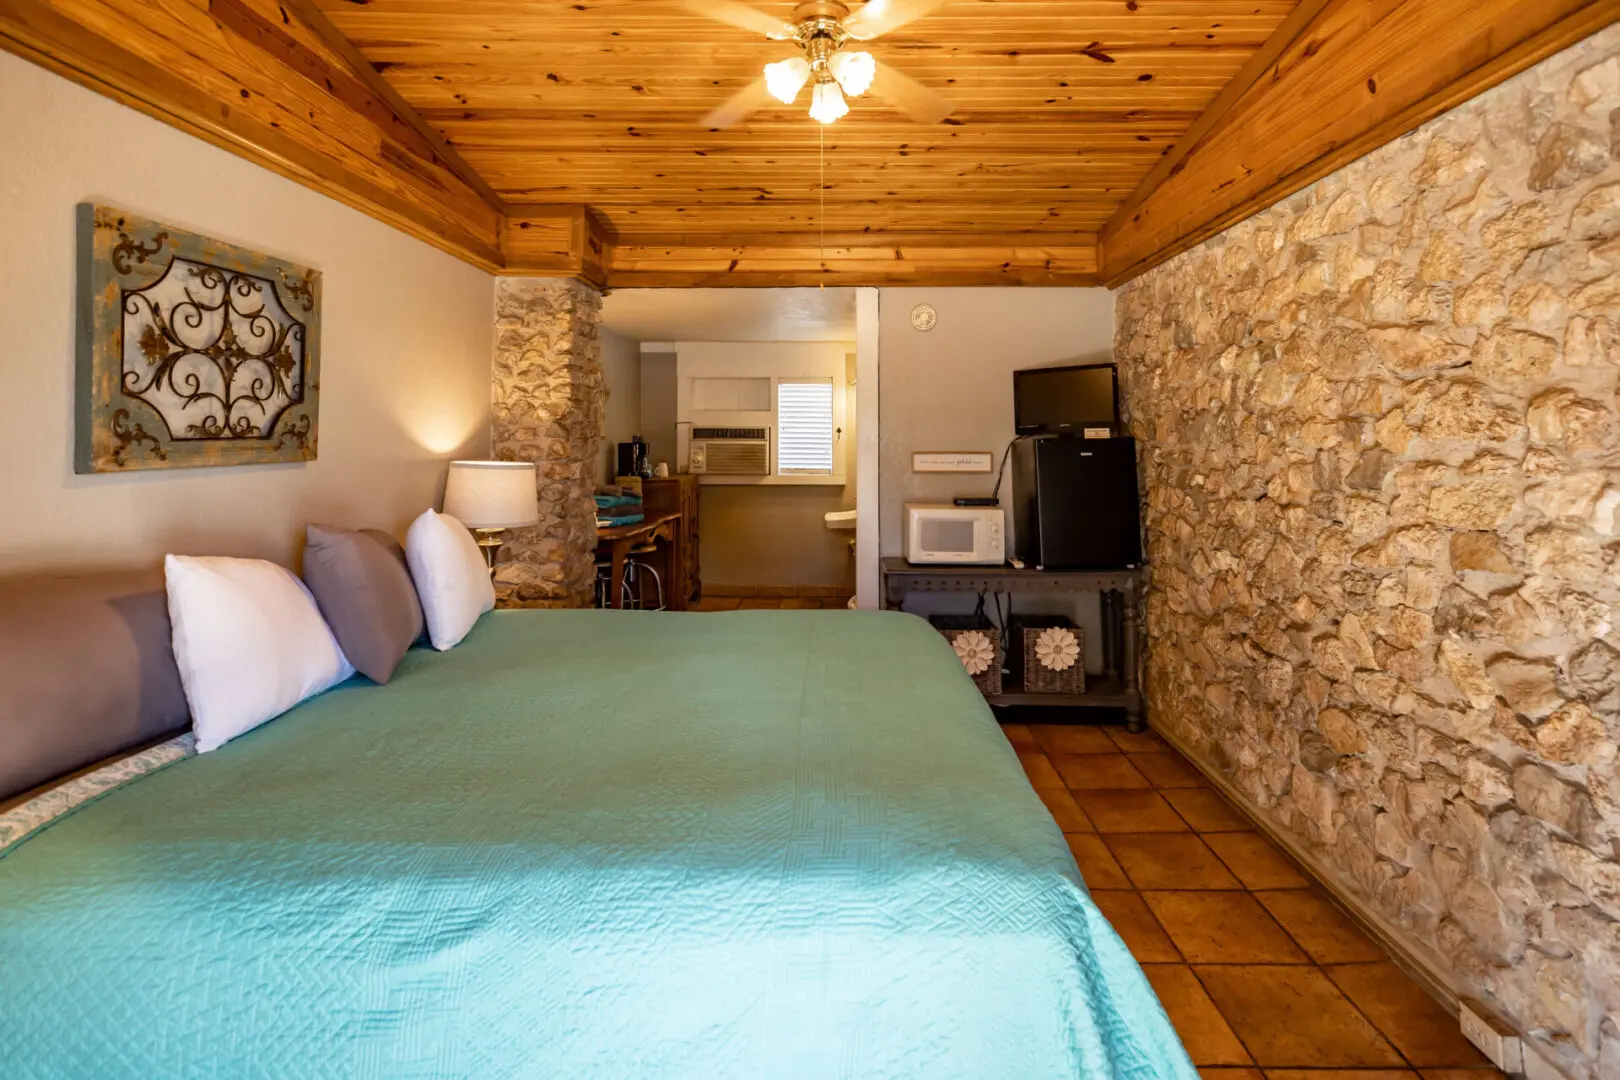 A room with a stone wall design and blue sheets on bed.